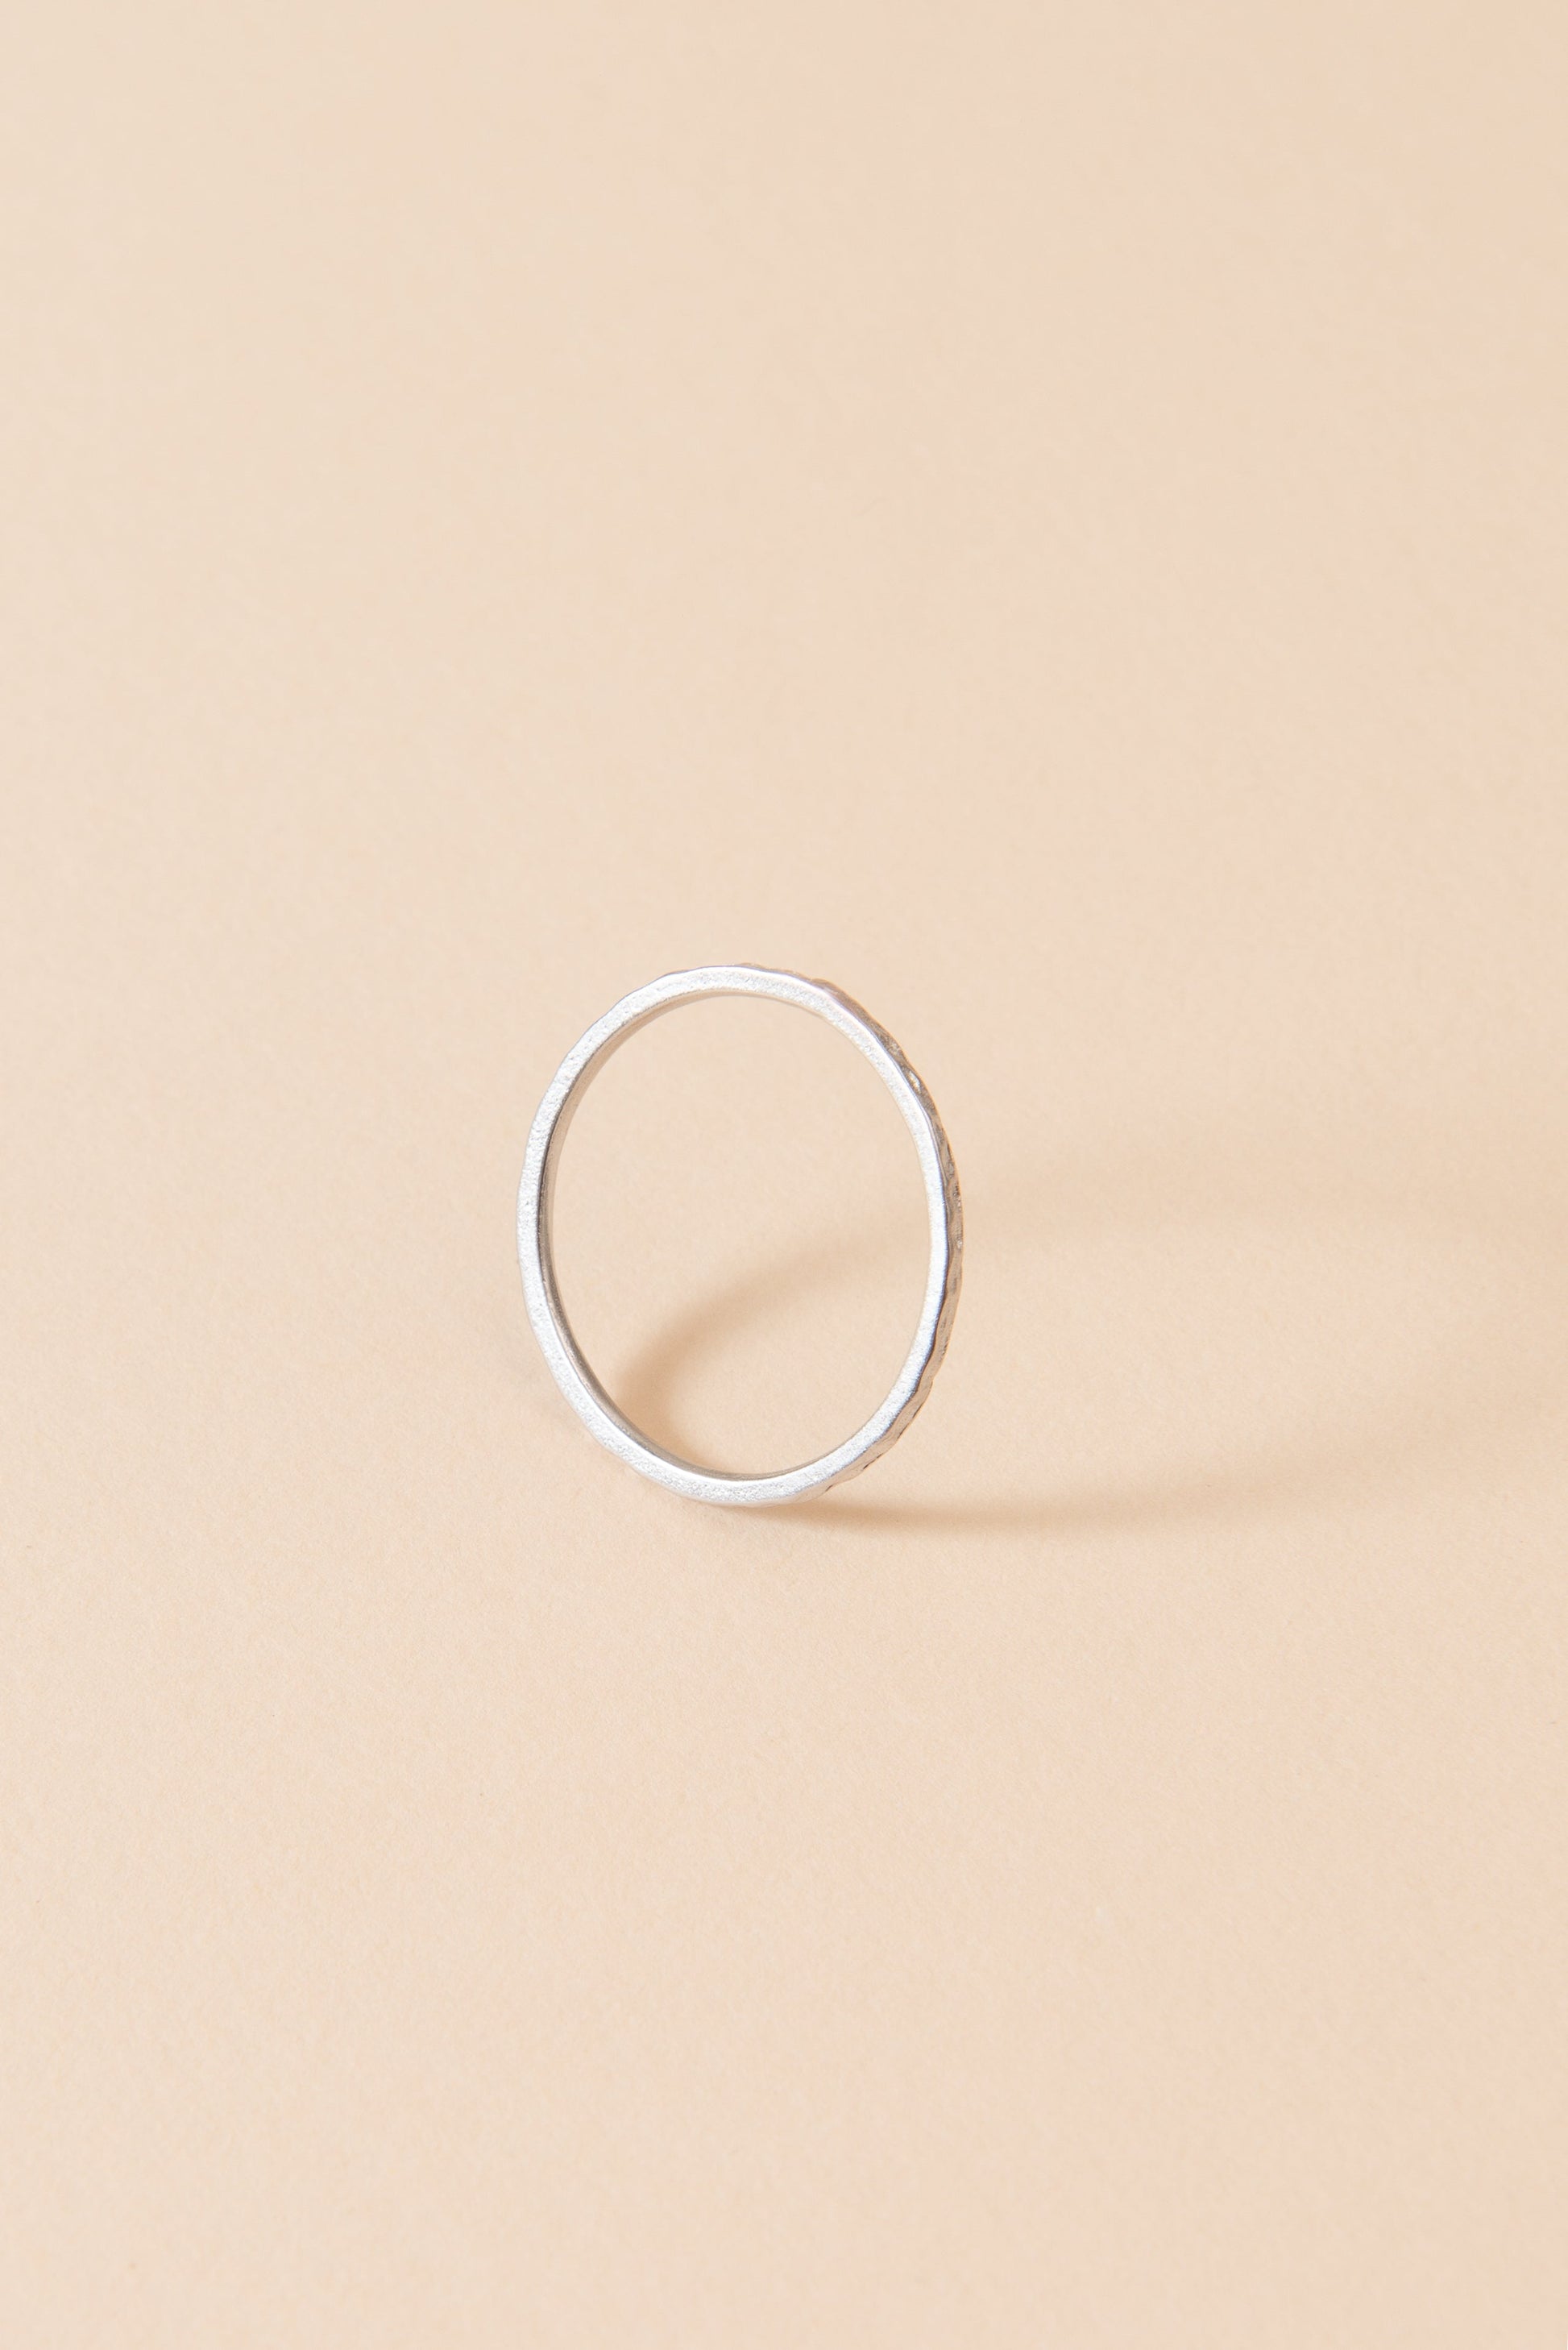 Dainty Single Textured Ring WOMEN'S RING Cove 